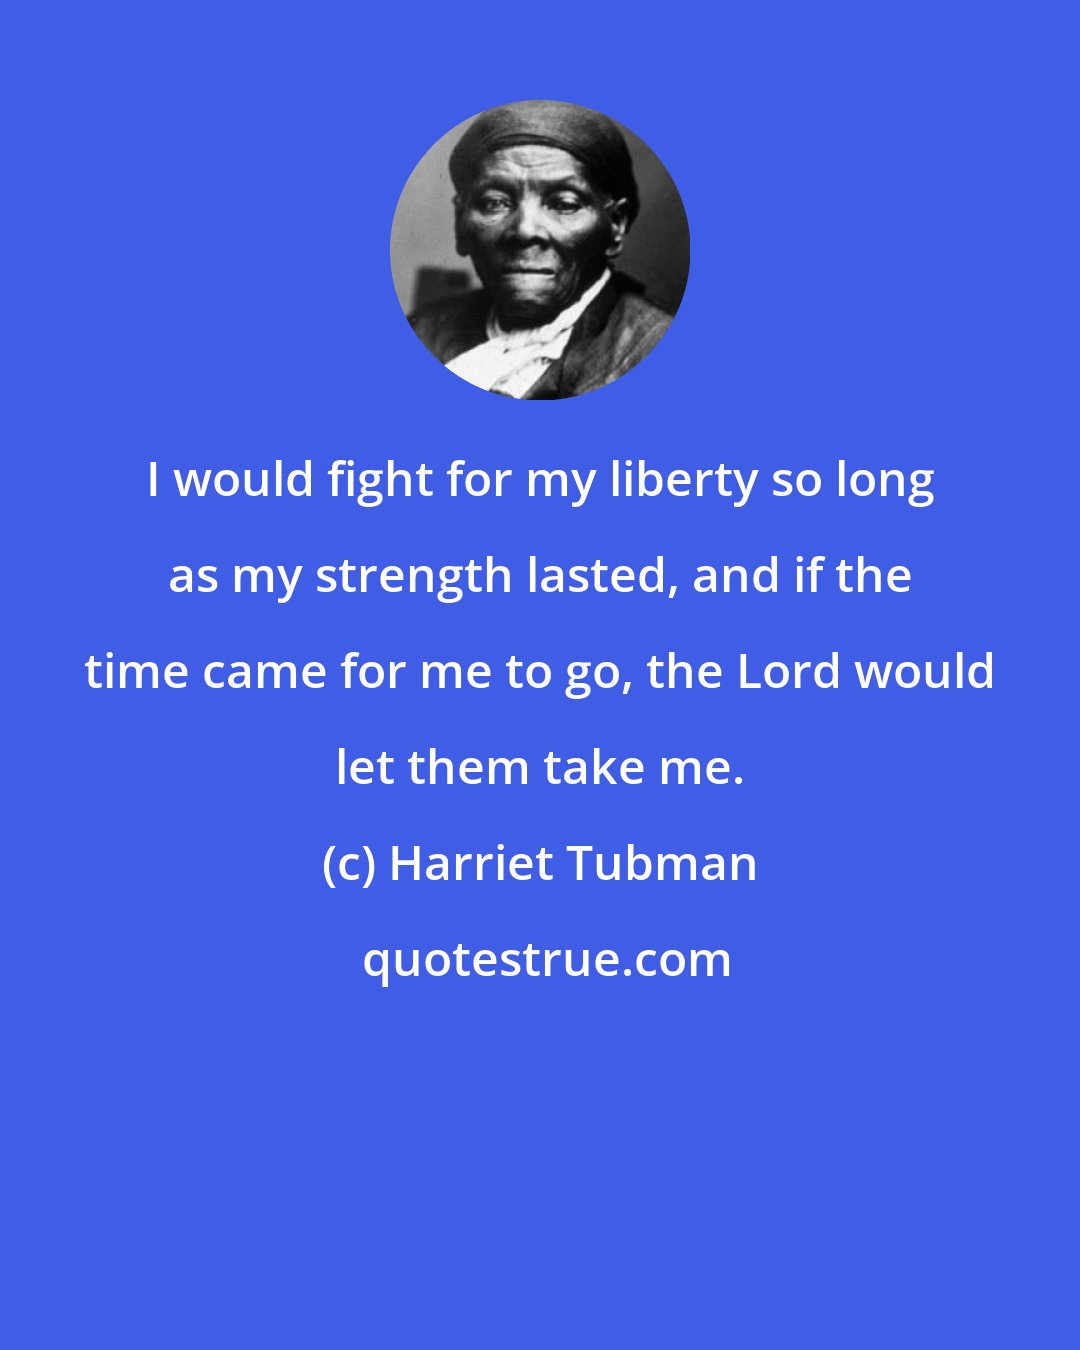 Harriet Tubman: I would fight for my liberty so long as my strength lasted, and if the time came for me to go, the Lord would let them take me.